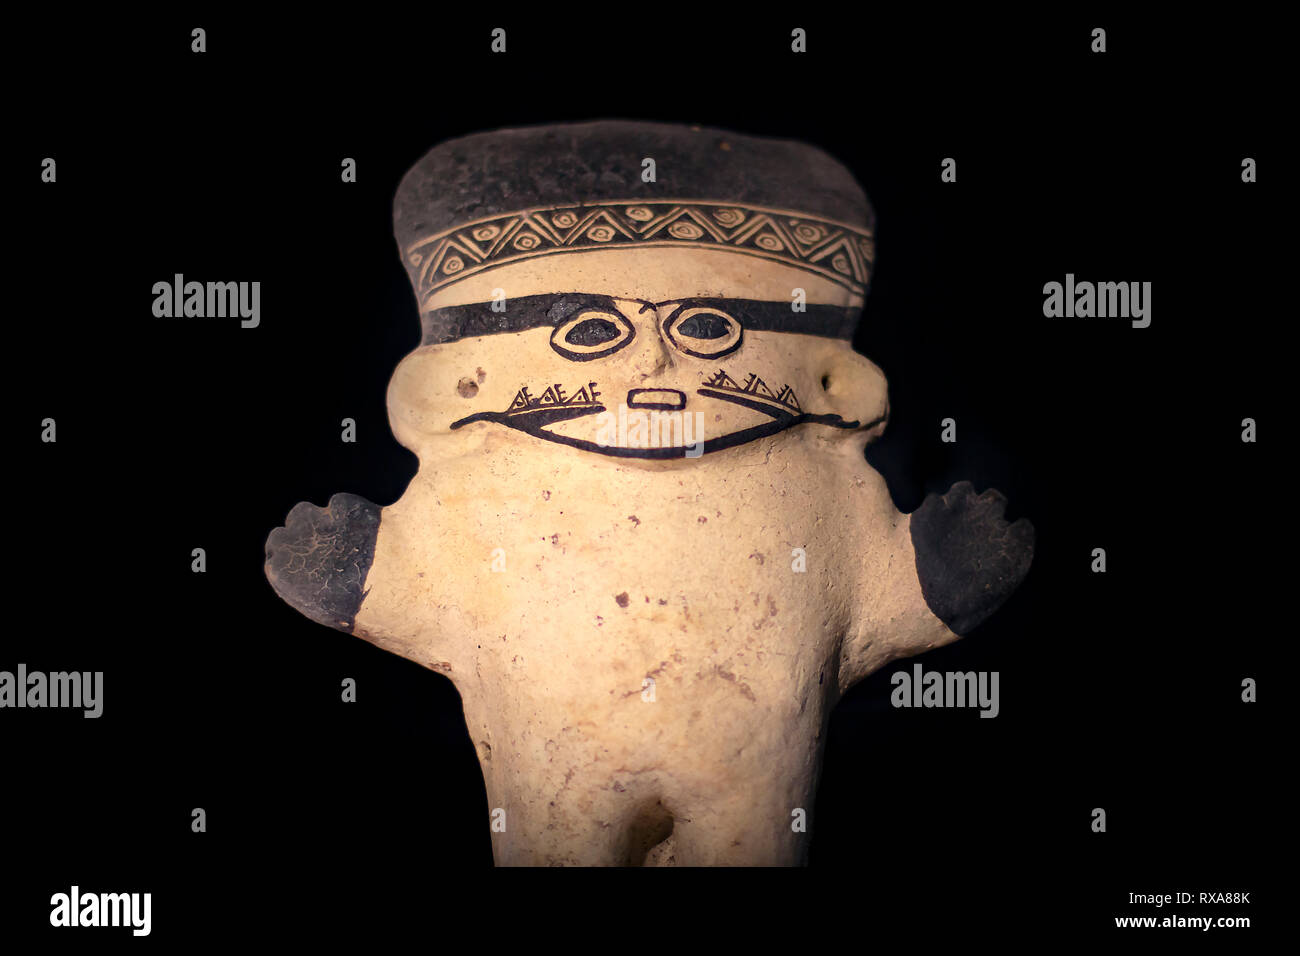 Precolombian ceramics called 'Huacos' from Chancay, a Peruvian culture. Private collection of pre inca pottery. Stock Photo